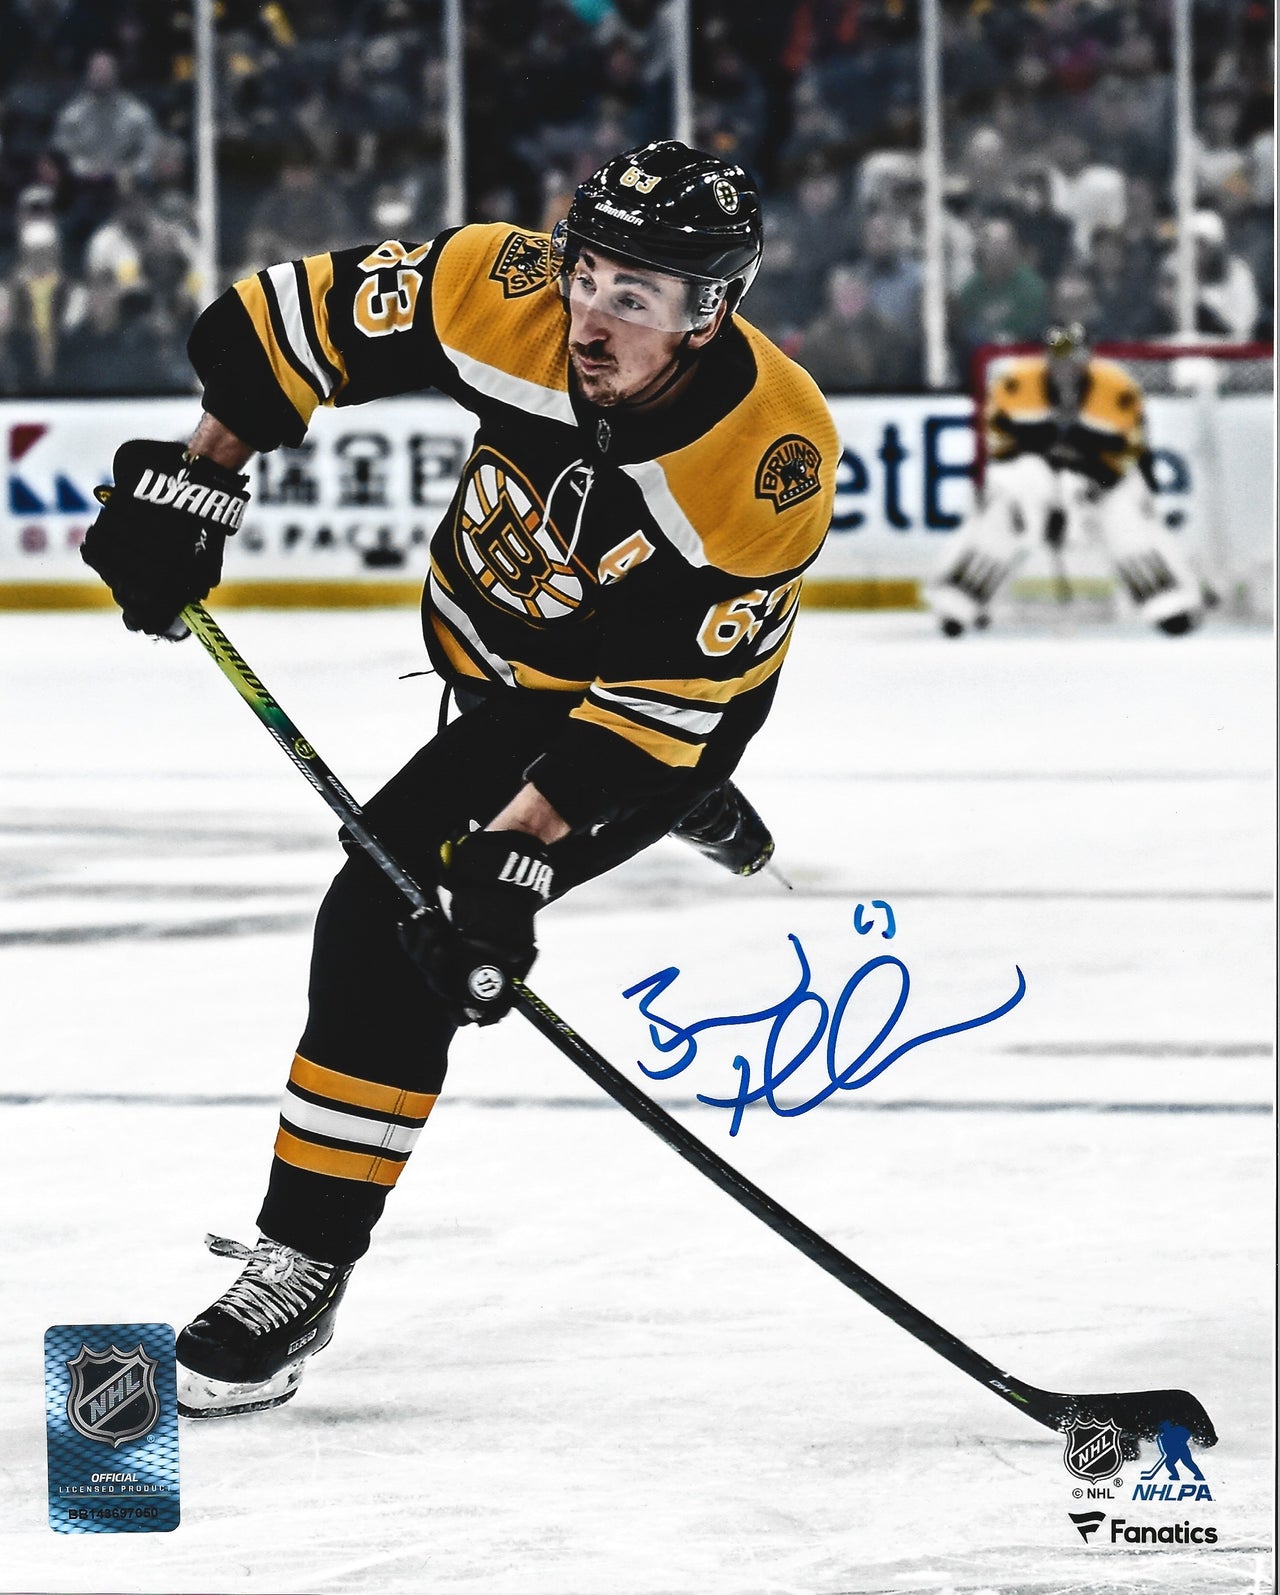 Brad Marchand Signed Boston Bruins Puck Display 26x32 Frame